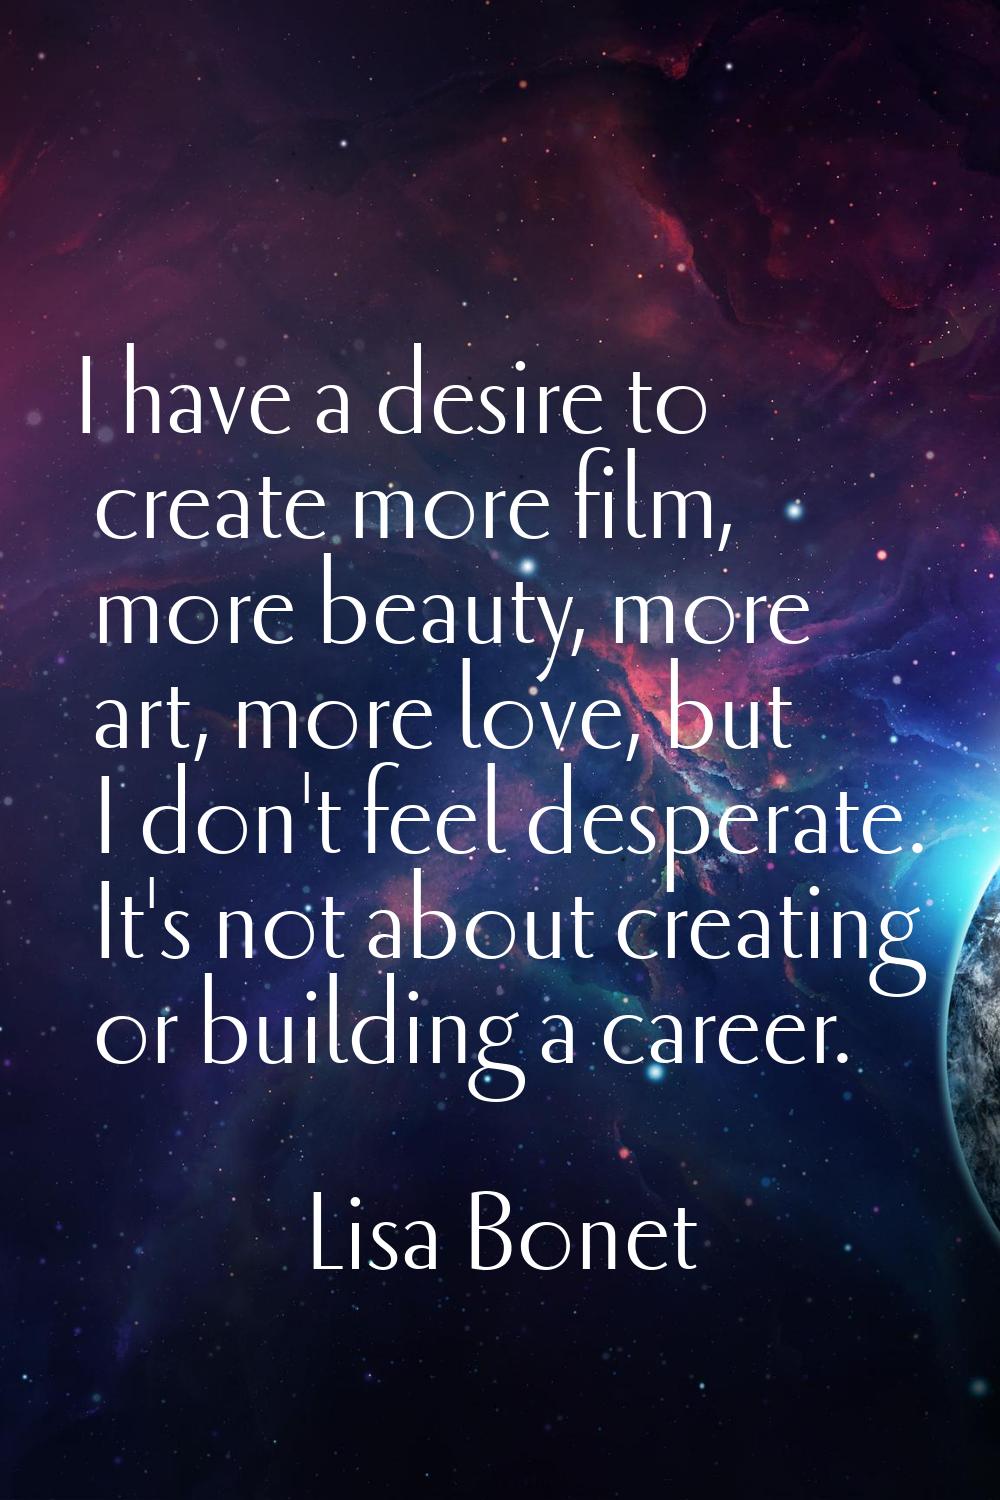 I have a desire to create more film, more beauty, more art, more love, but I don't feel desperate. 